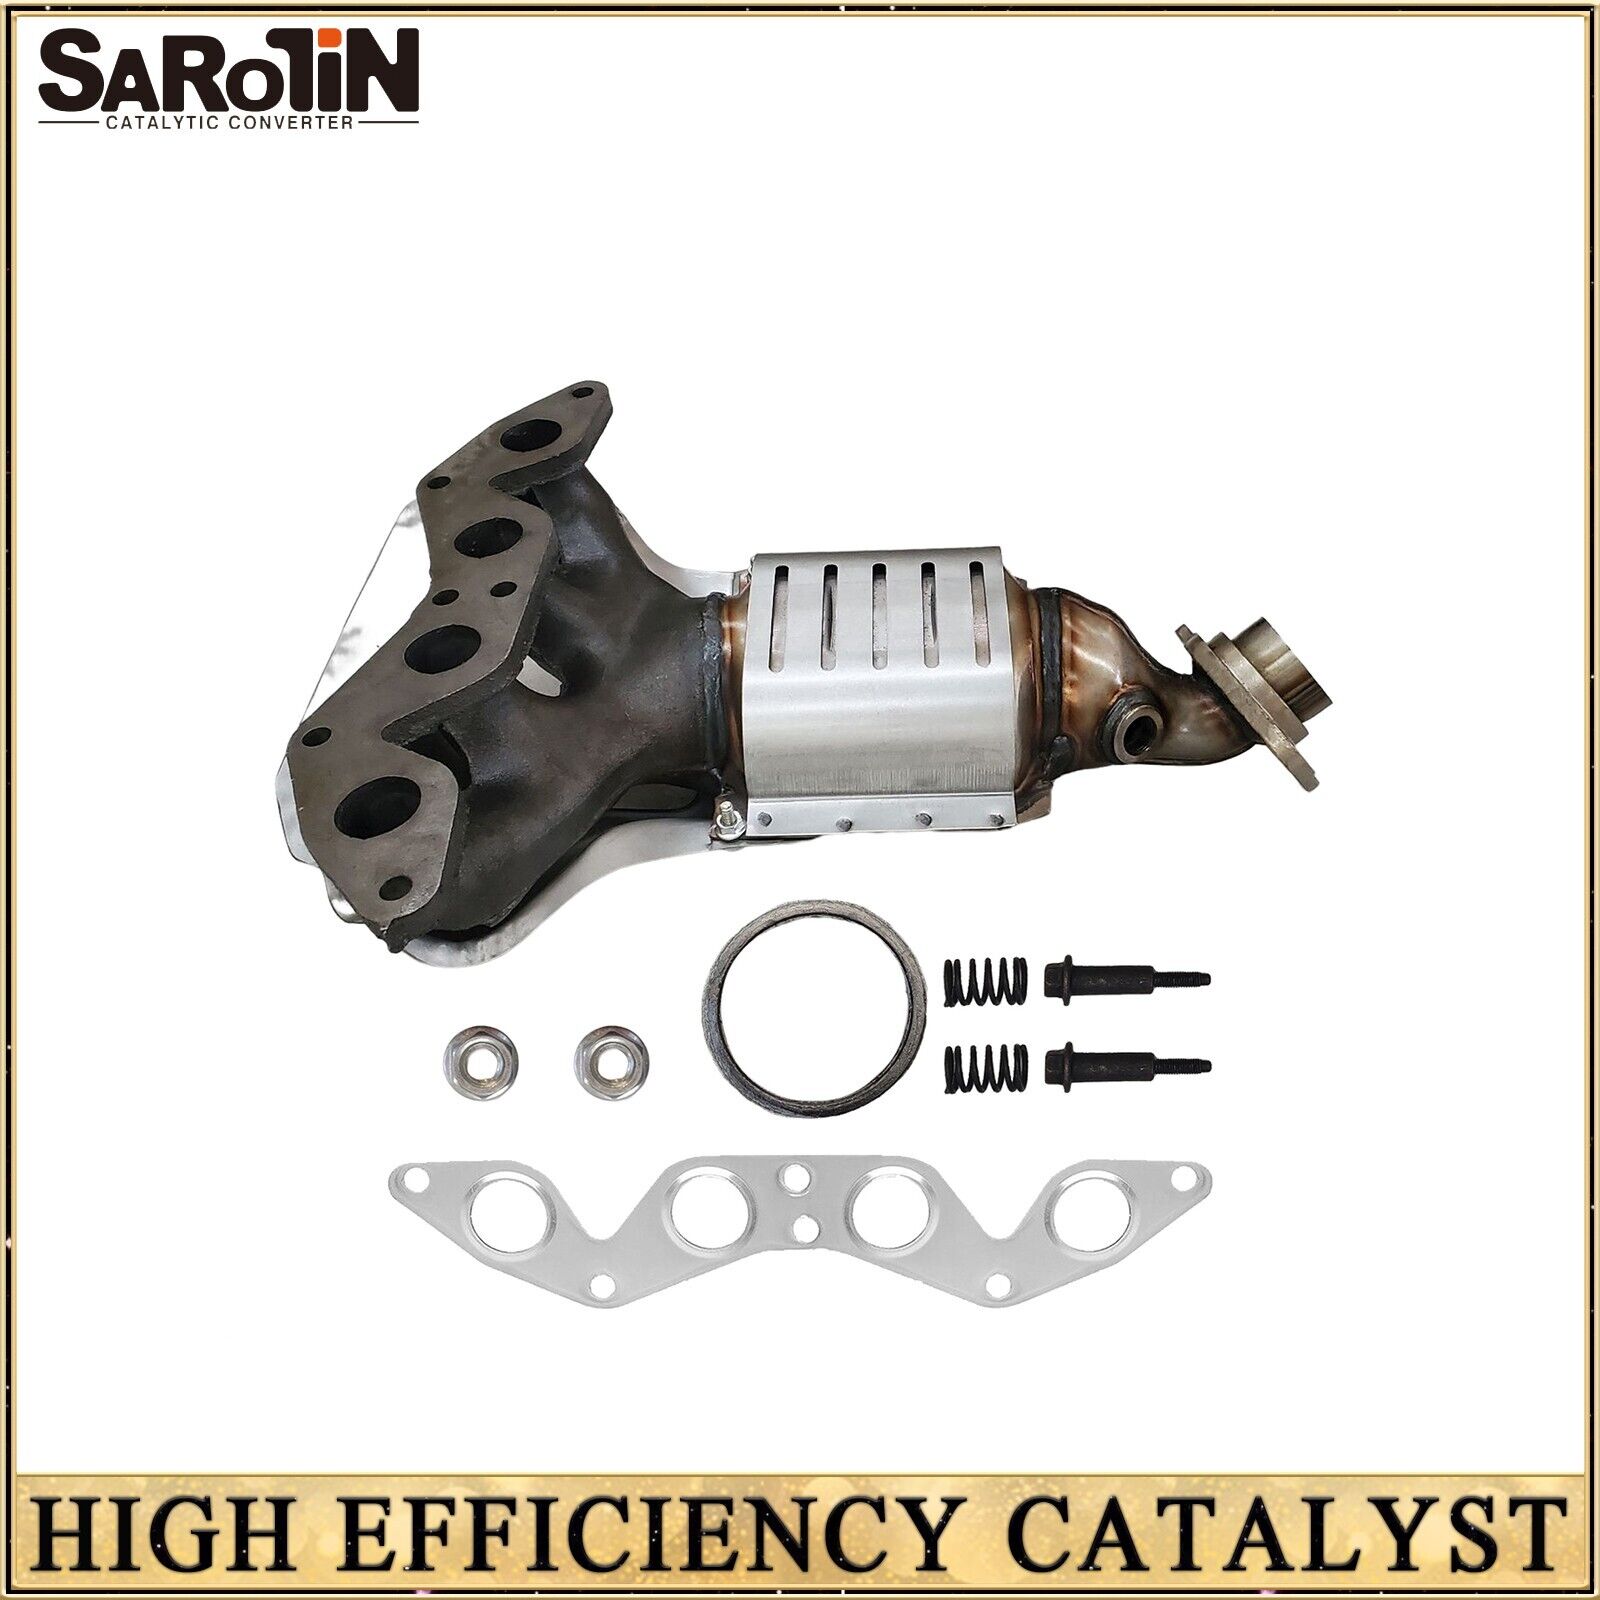 For 2001-2005 Honda Civic DX/LX/GX/HX Value Package 1.7L Catalytic Converter EPA